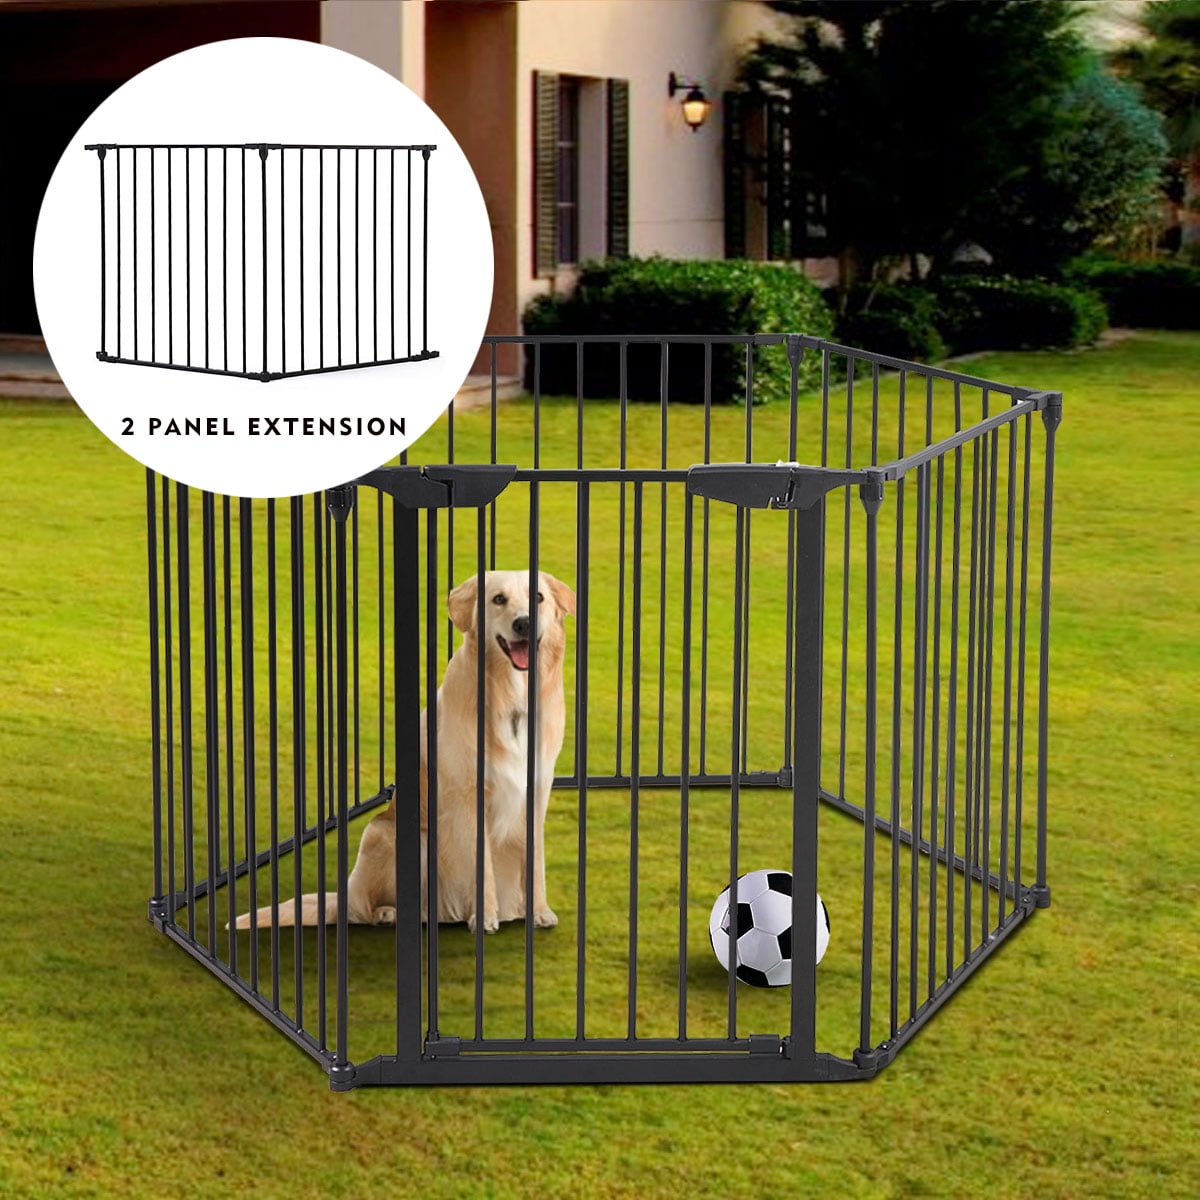 JAXPETY Fireplace Fence Baby Safety Fence 2 Panel Extension Kit Hearth Gate Pet Gate Guard Metal Plastic Screen, Black